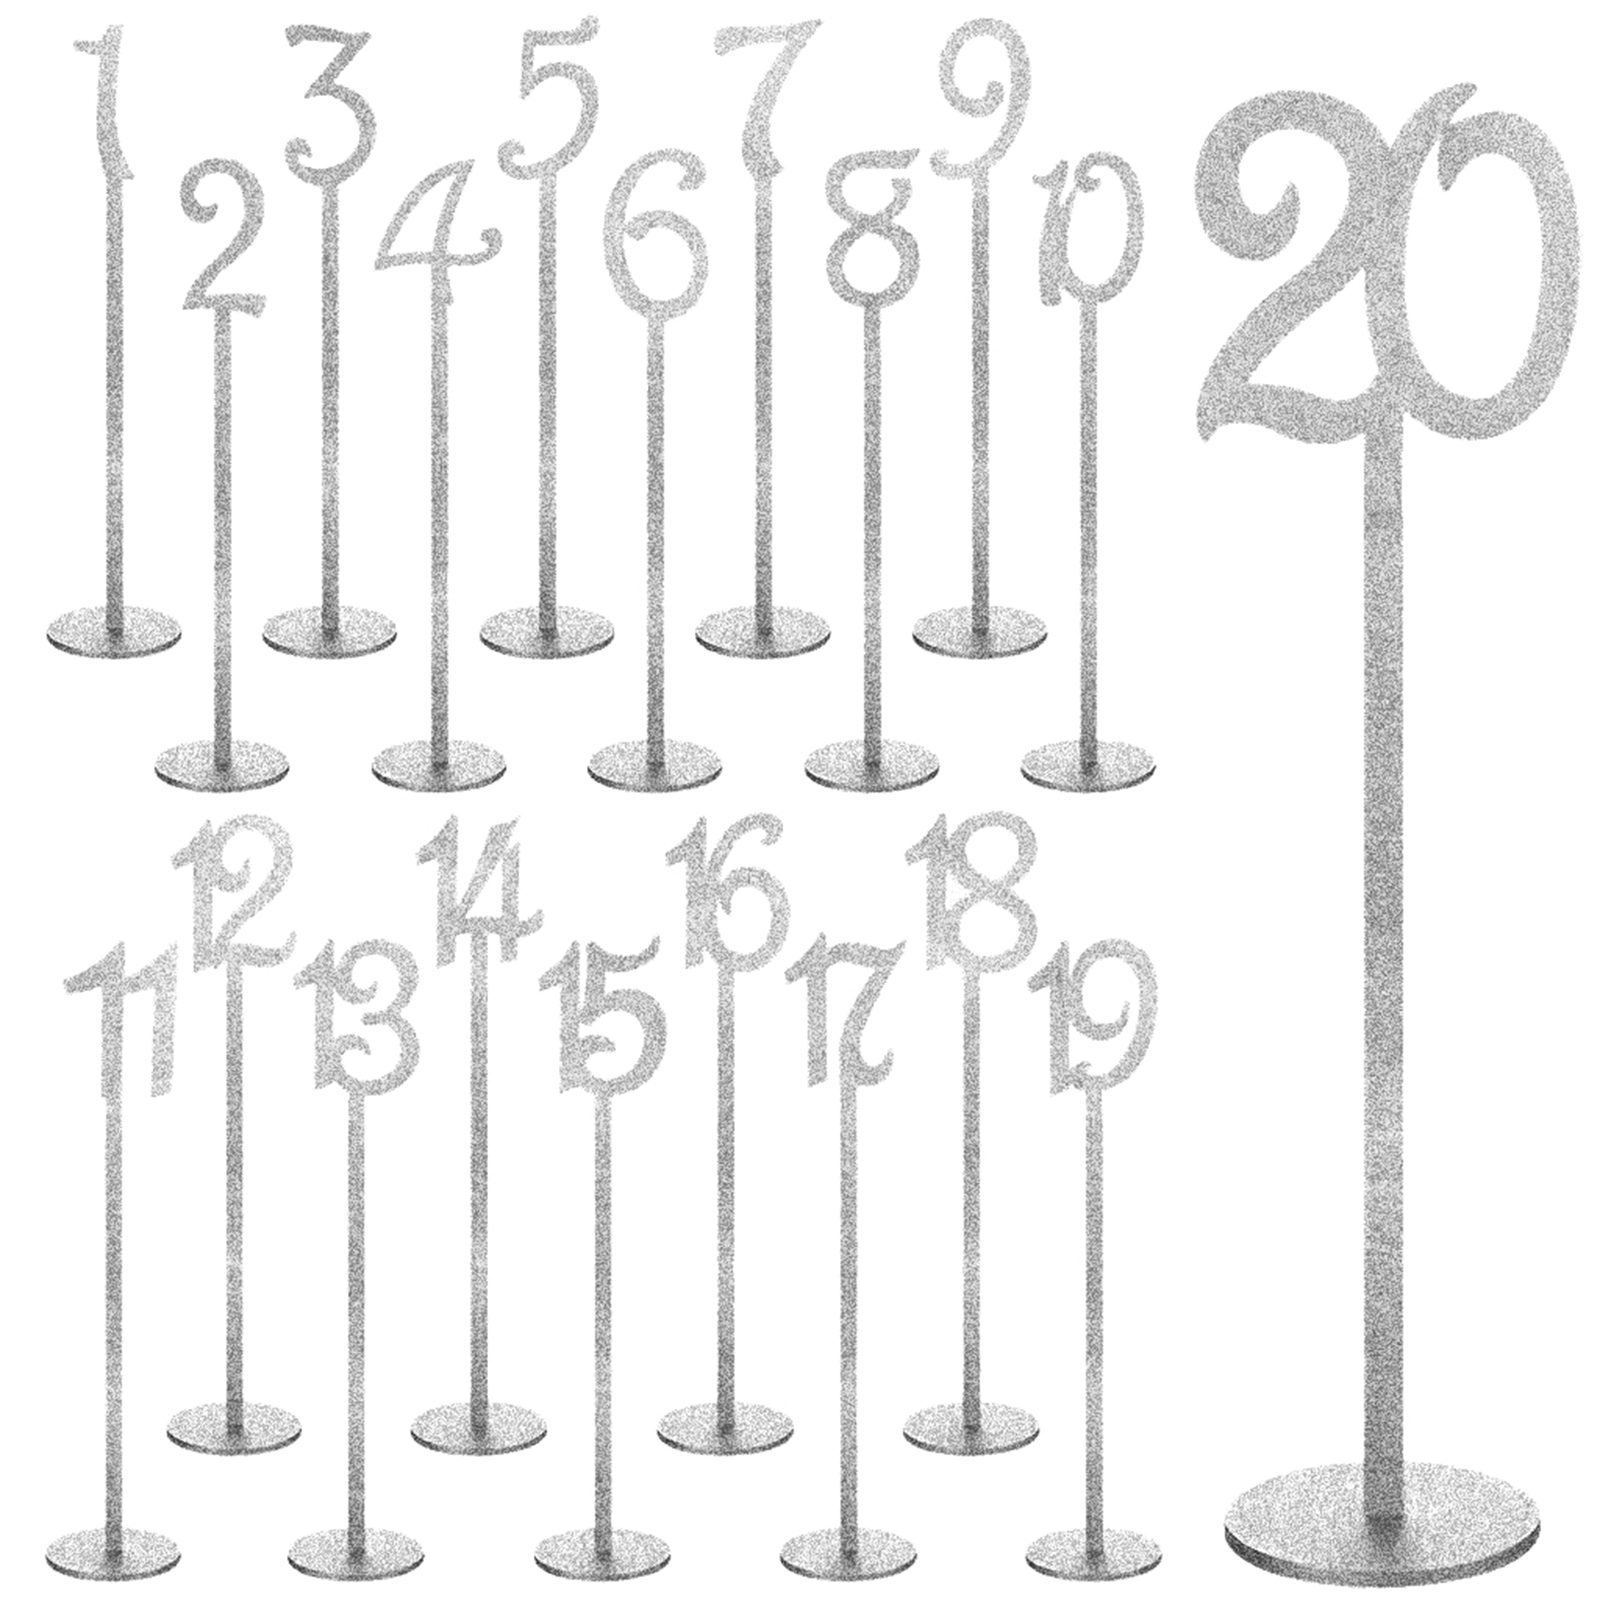 20 Pcs Wood Table Numbers For Wedding Reception Stands Seat Numbers With Holder Base Table Numbers For Wedding Party